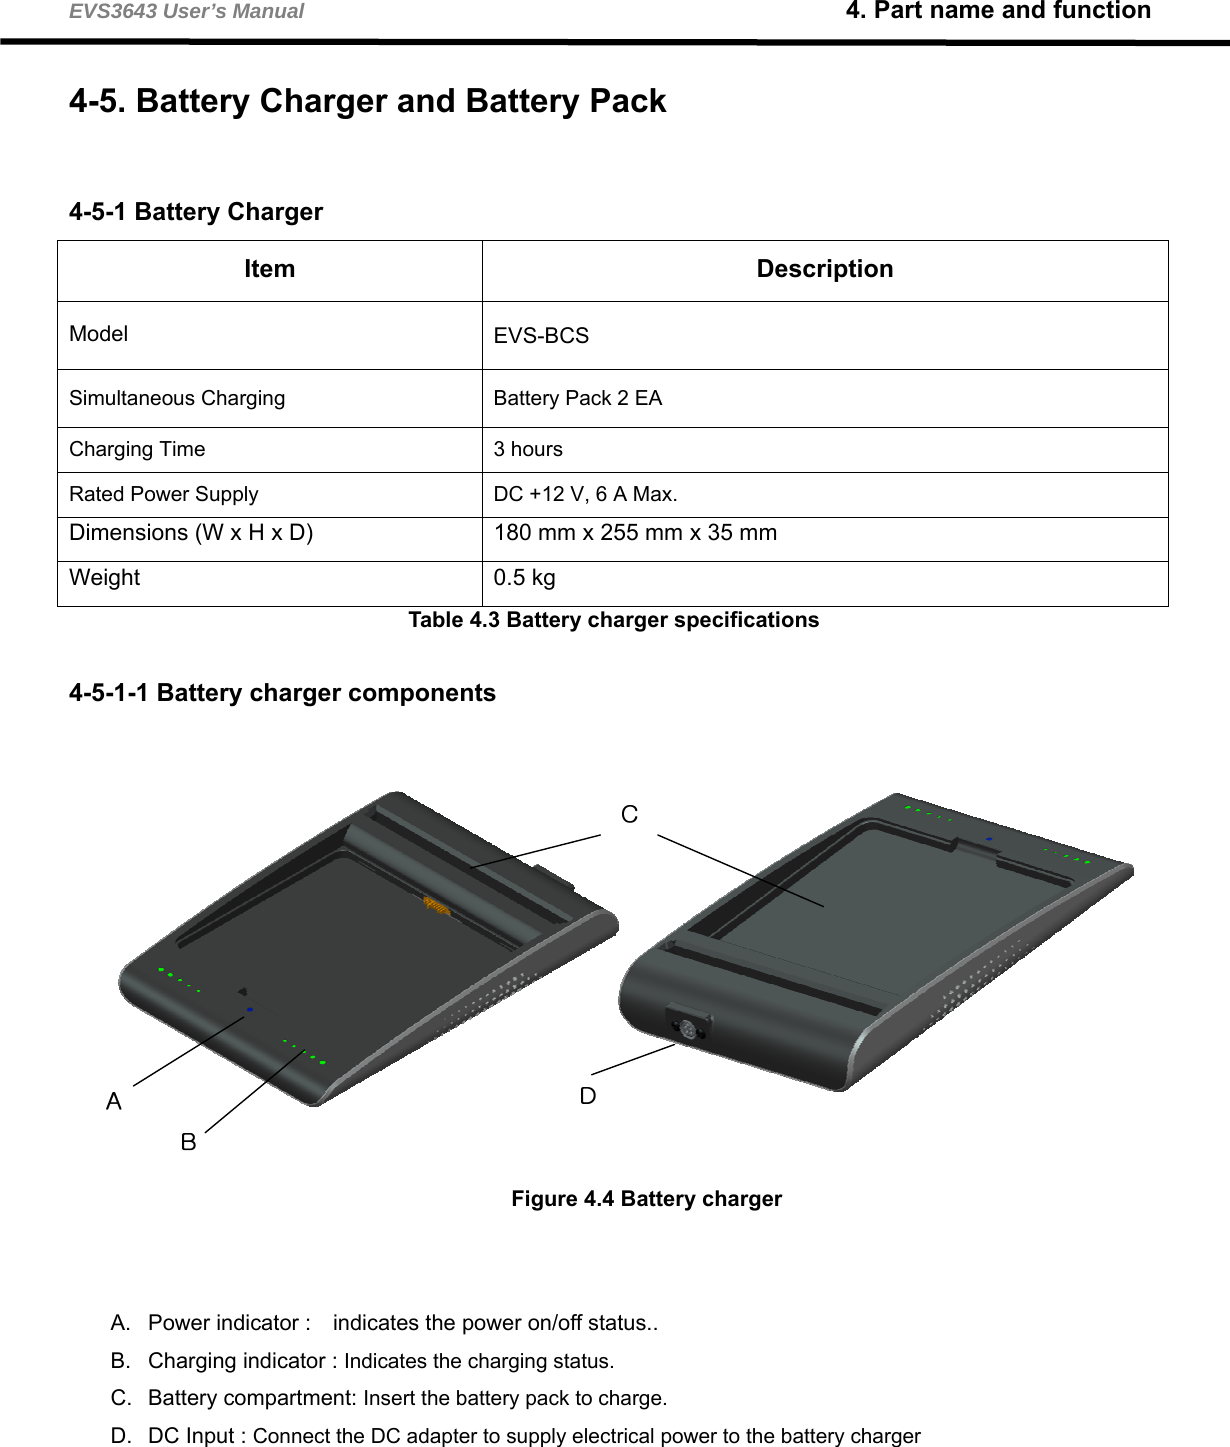 EVS3643 User’s Manual                                                    4. Part name and function   4-5. Battery Charger and Battery Pack  4-5-1 Battery Charger Item Description Model  EVS-BCS Simultaneous Charging   Battery Pack 2 EA   Charging Time   3 hours   Rated Power Supply  DC +12 V, 6 A Max.   Dimensions (W x H x D)  180 mm x 255 mm x 35 mm Weight 0.5 kg Table 4.3 Battery charger specifications  4-5-1-1 Battery charger components   Figure 4.4 Battery charger   A.  Power indicator :    indicates the power on/off status.. B.  Charging indicator : Indicates the charging status.   C. Battery compartment: Insert the battery pack to charge.   D.  DC Input : Connect the DC adapter to supply electrical power to the battery charger    